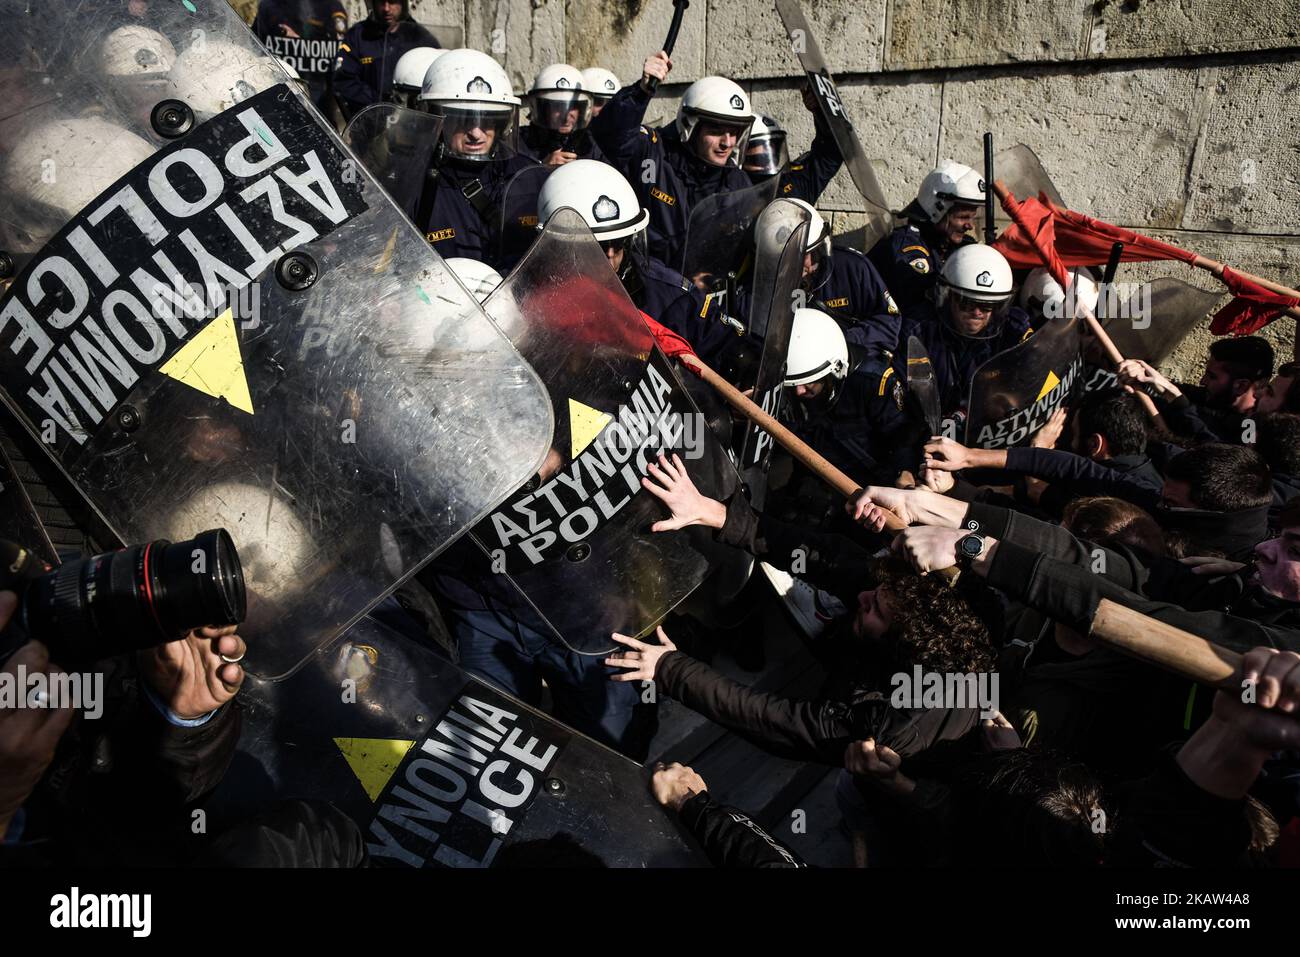 Protesters clash with police after the end of a protest against new reforms planned by the government concerning property auctions and labor strikes, outside parliament, in central Athens, Greece, 12 January 2018 Thousands of Greek protesters marched in central Athens on Friday against new reforms, including restrictions on the right to strike, that Parliament is set to approve next week in return for bailout funds. “Hands off strikes!” protesters with Communist-affiliated group PAME chanted during a march of about 20,000 people, as lawmakers debated in parliament. Others held banners reading  Stock Photo